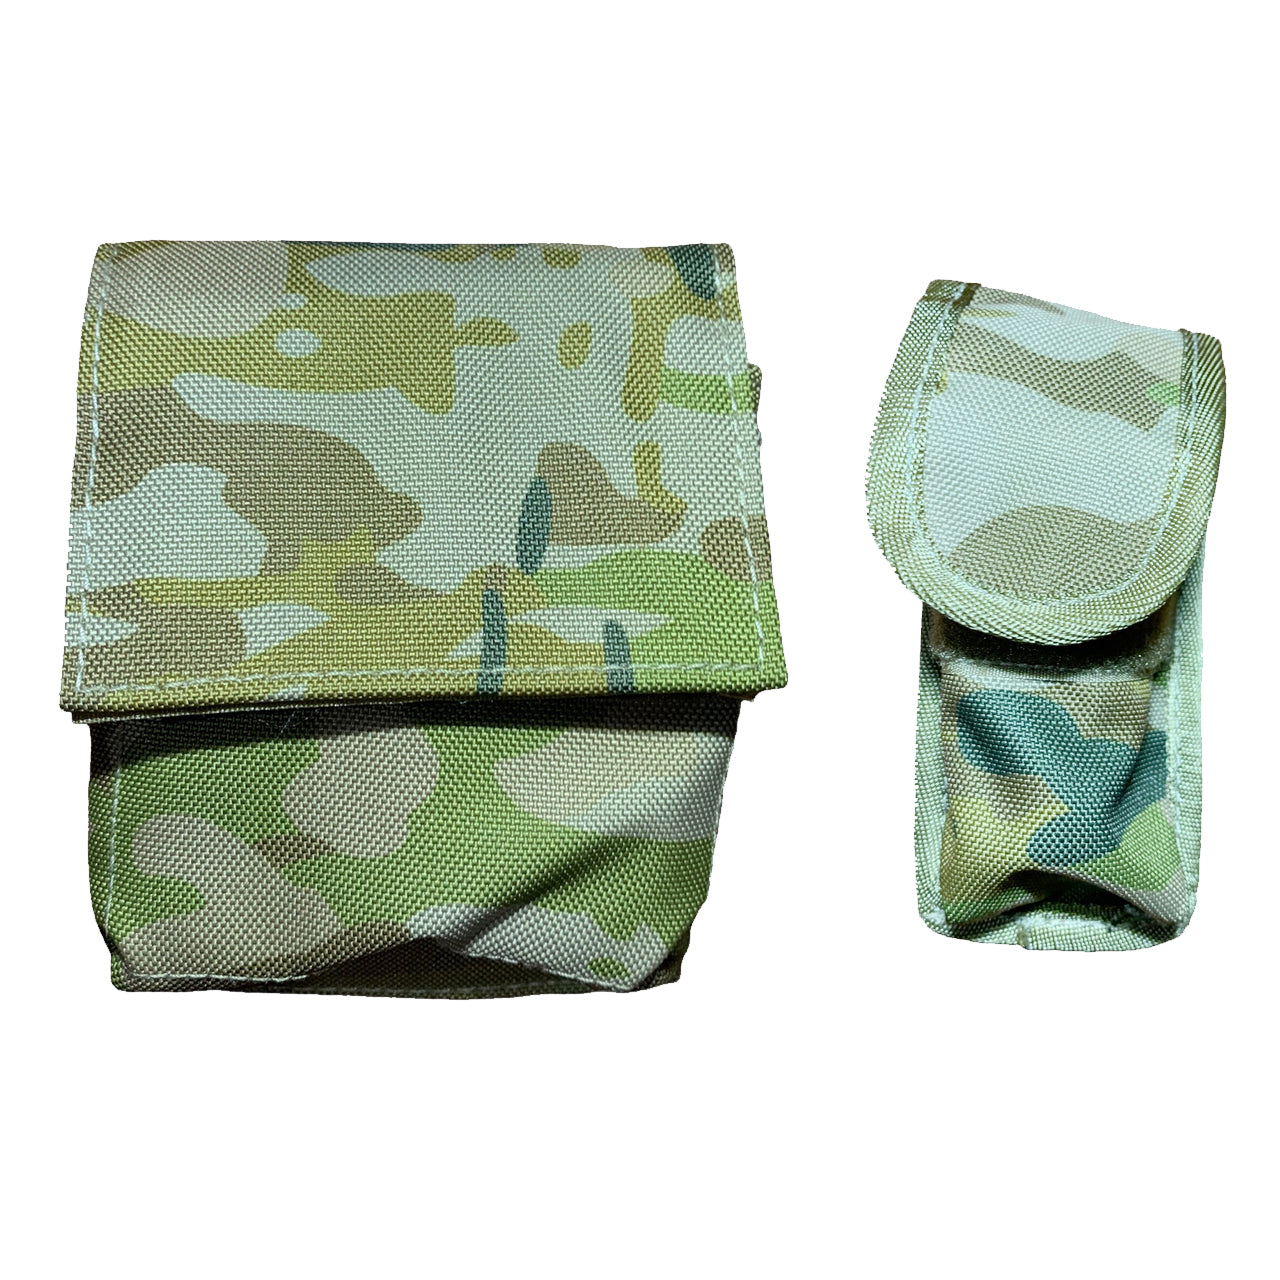 This rugged AMCU bundle includes heavy-duty 900D fabric and double PU coating, made to stand up to even the most rigorous military specs! www.defenceqstore.com.au